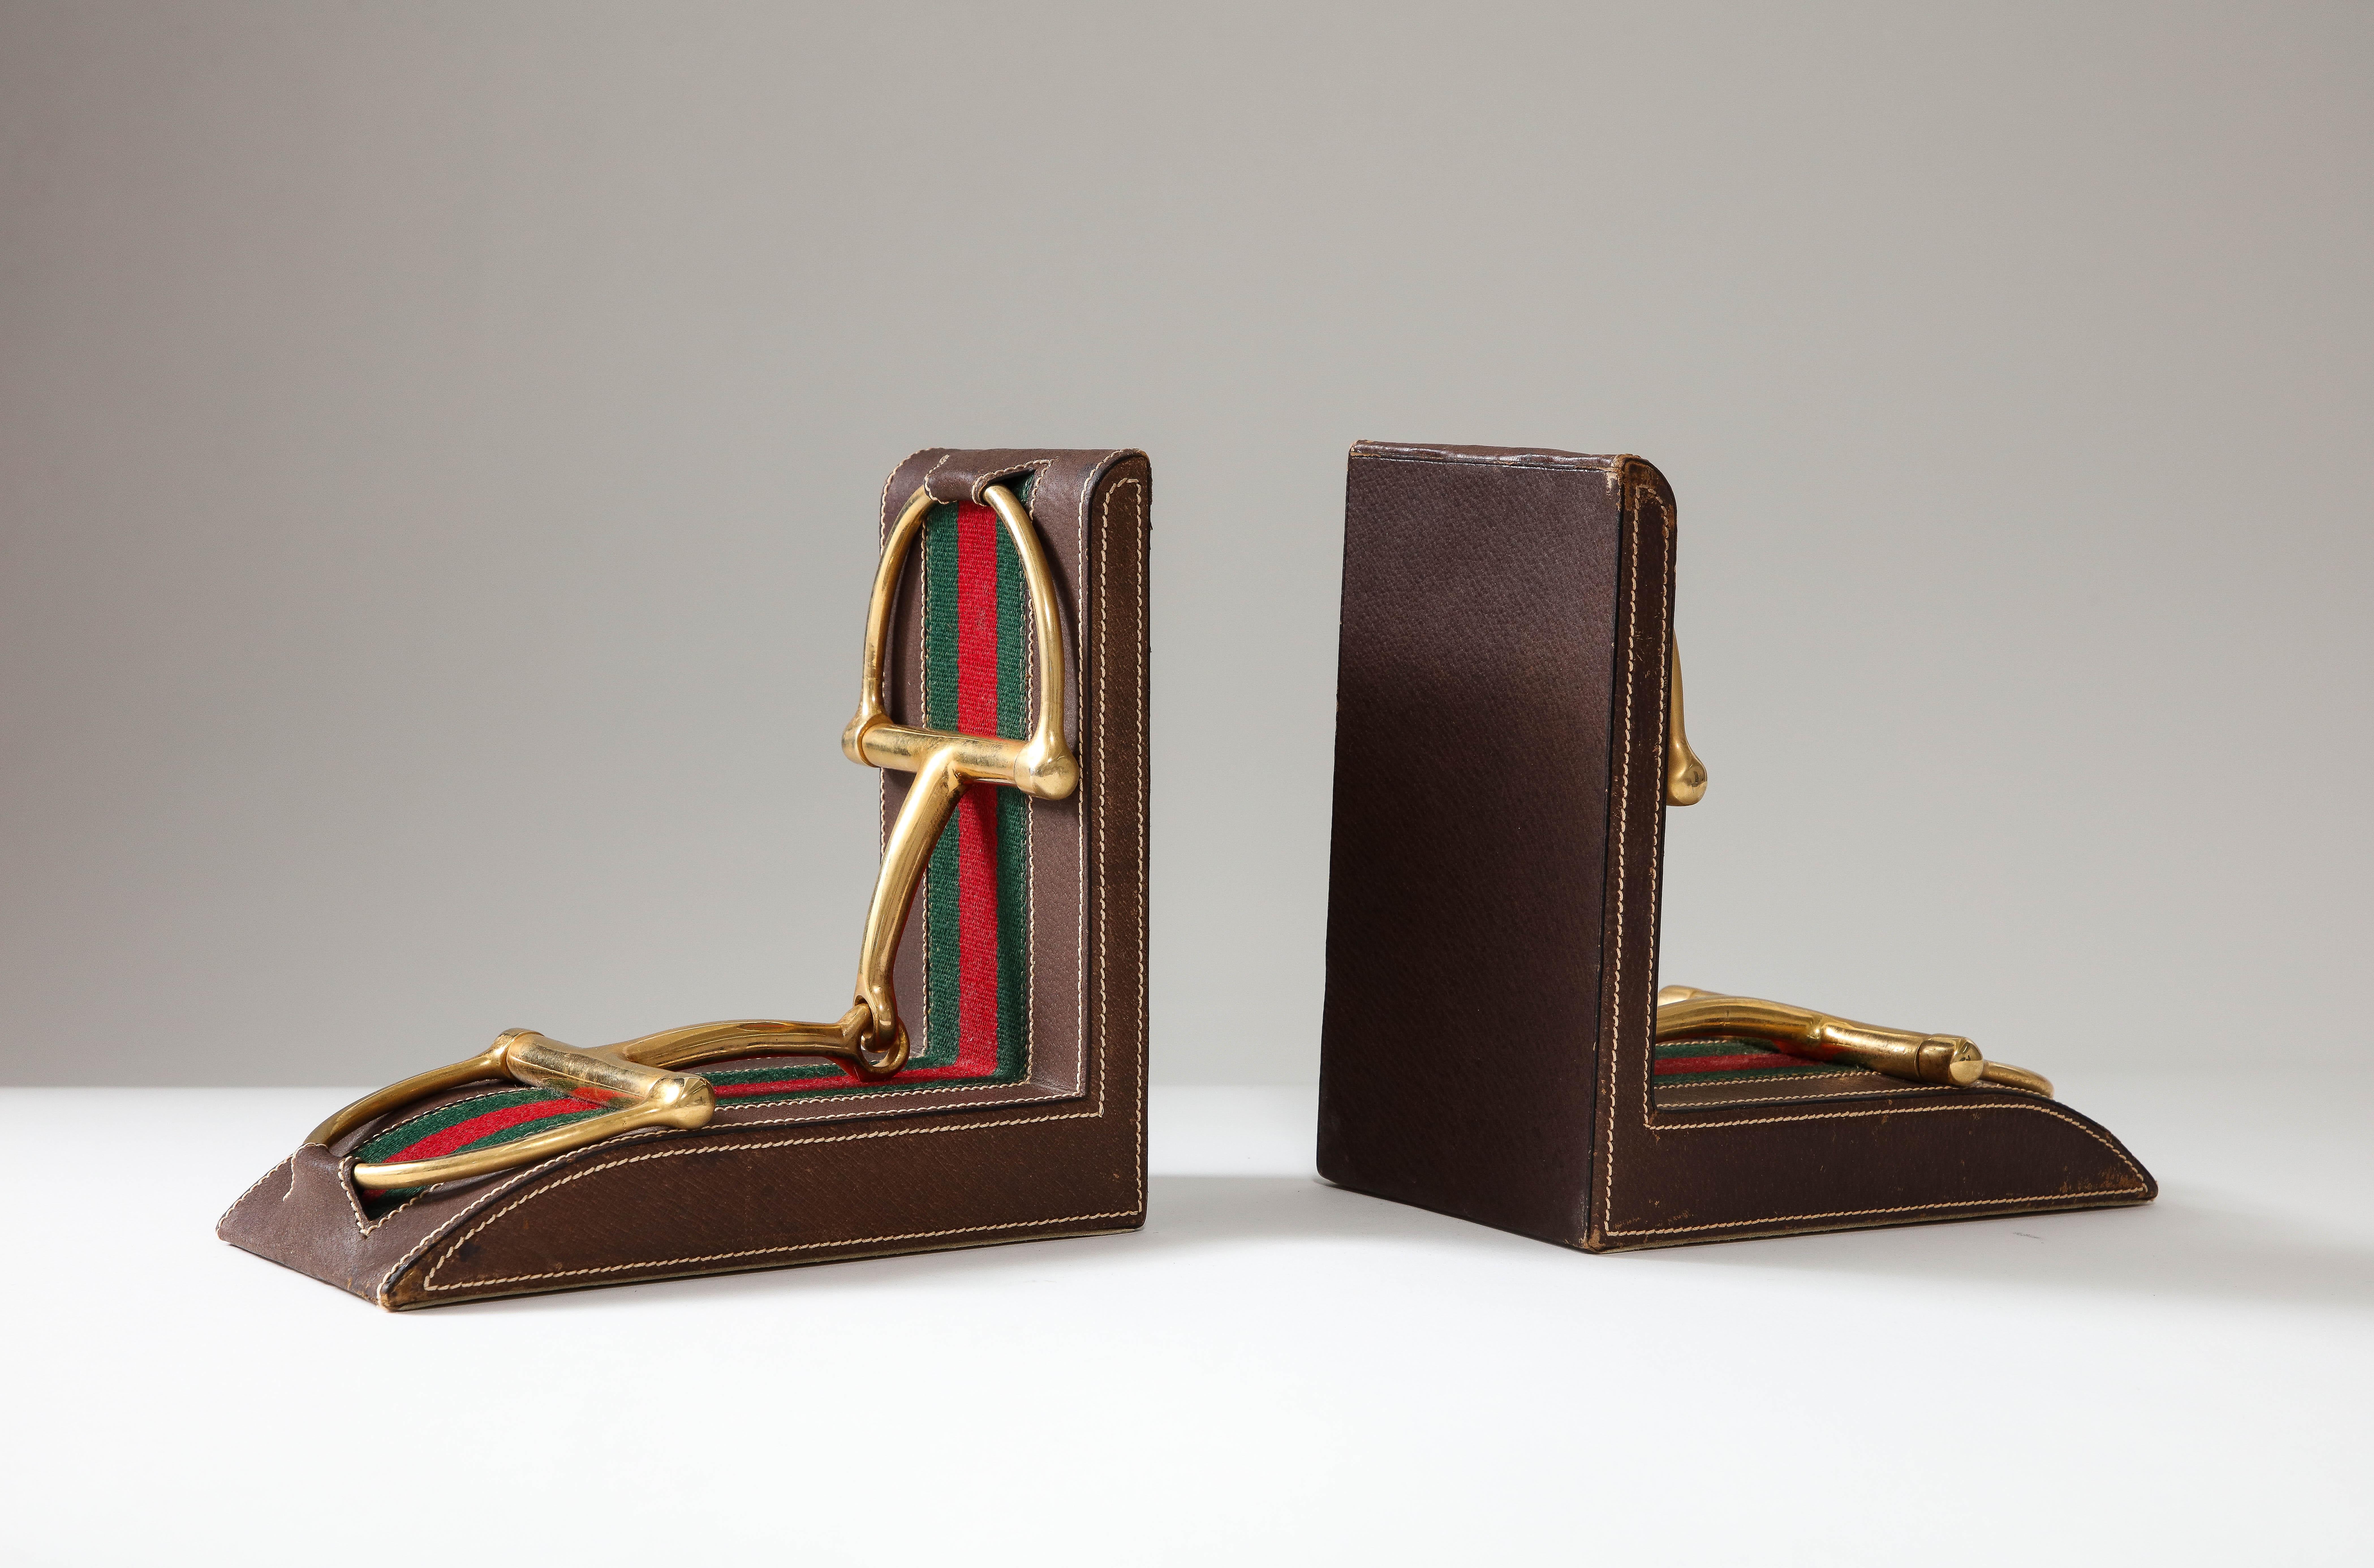 Pair of Leather and Brass Bookends, Gucci, Italy, c. 1970 For Sale 2